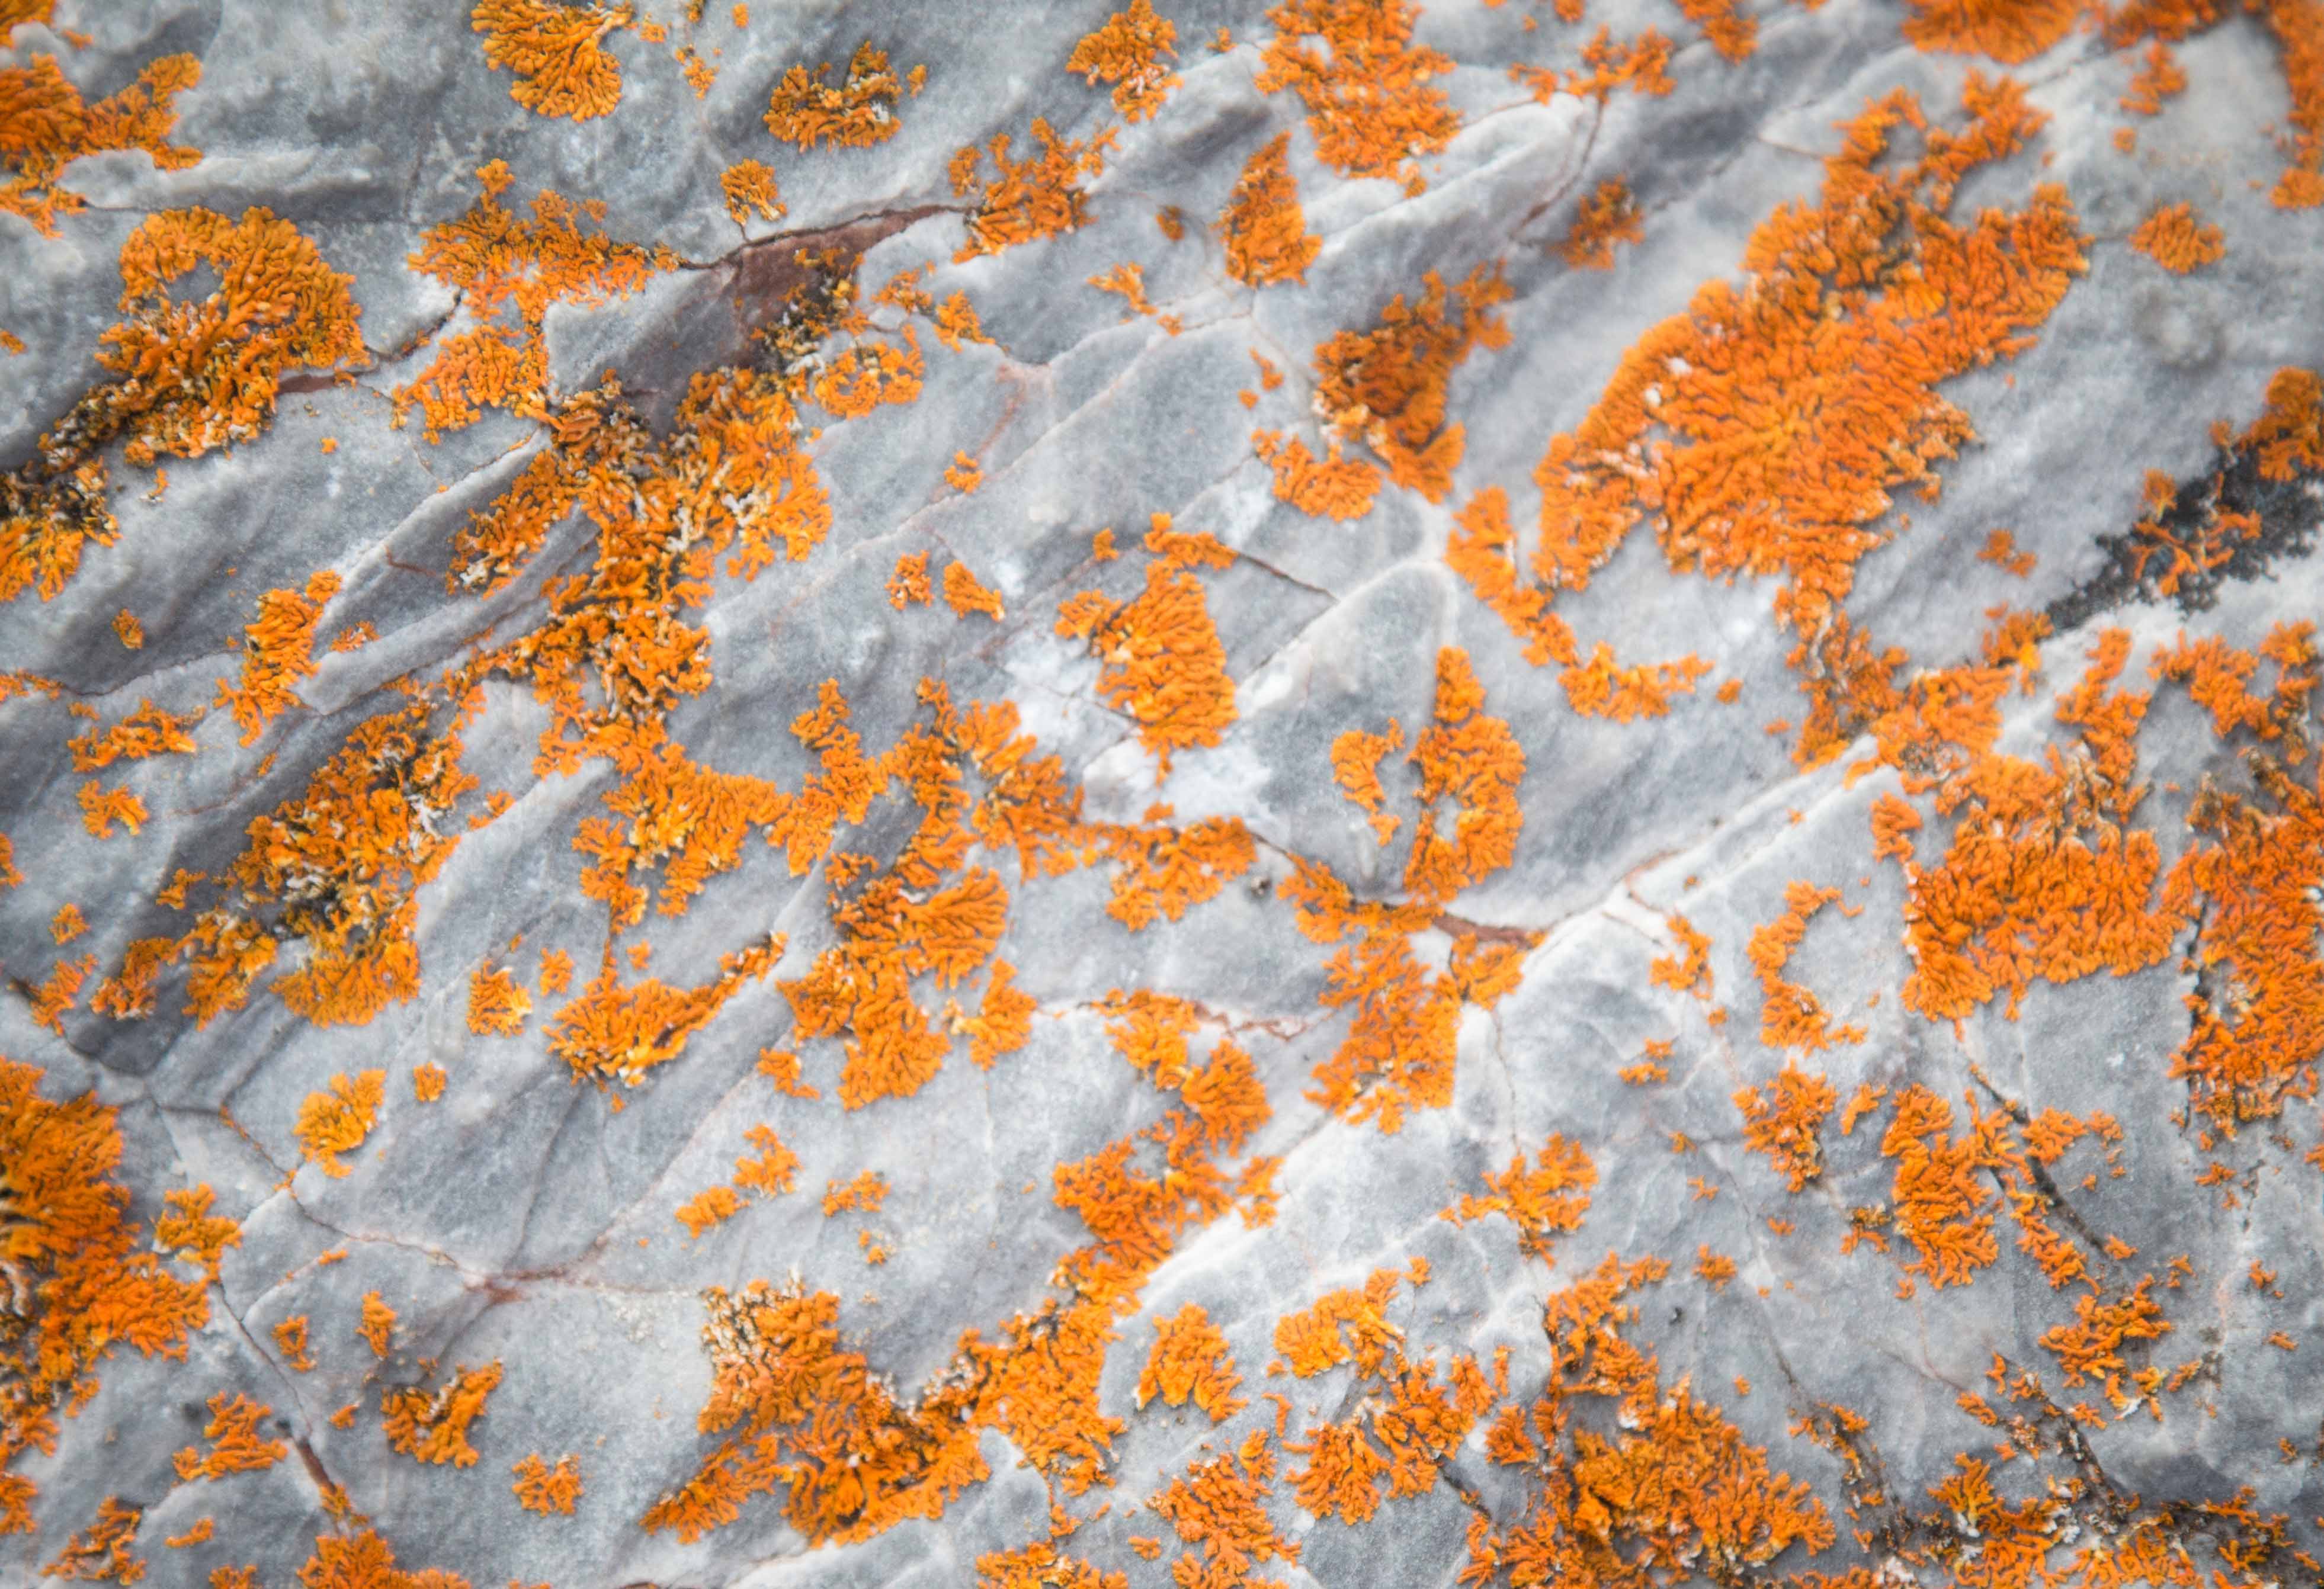 The persevering lichen has adapted to the Arctic tundra, thriving without any soil.